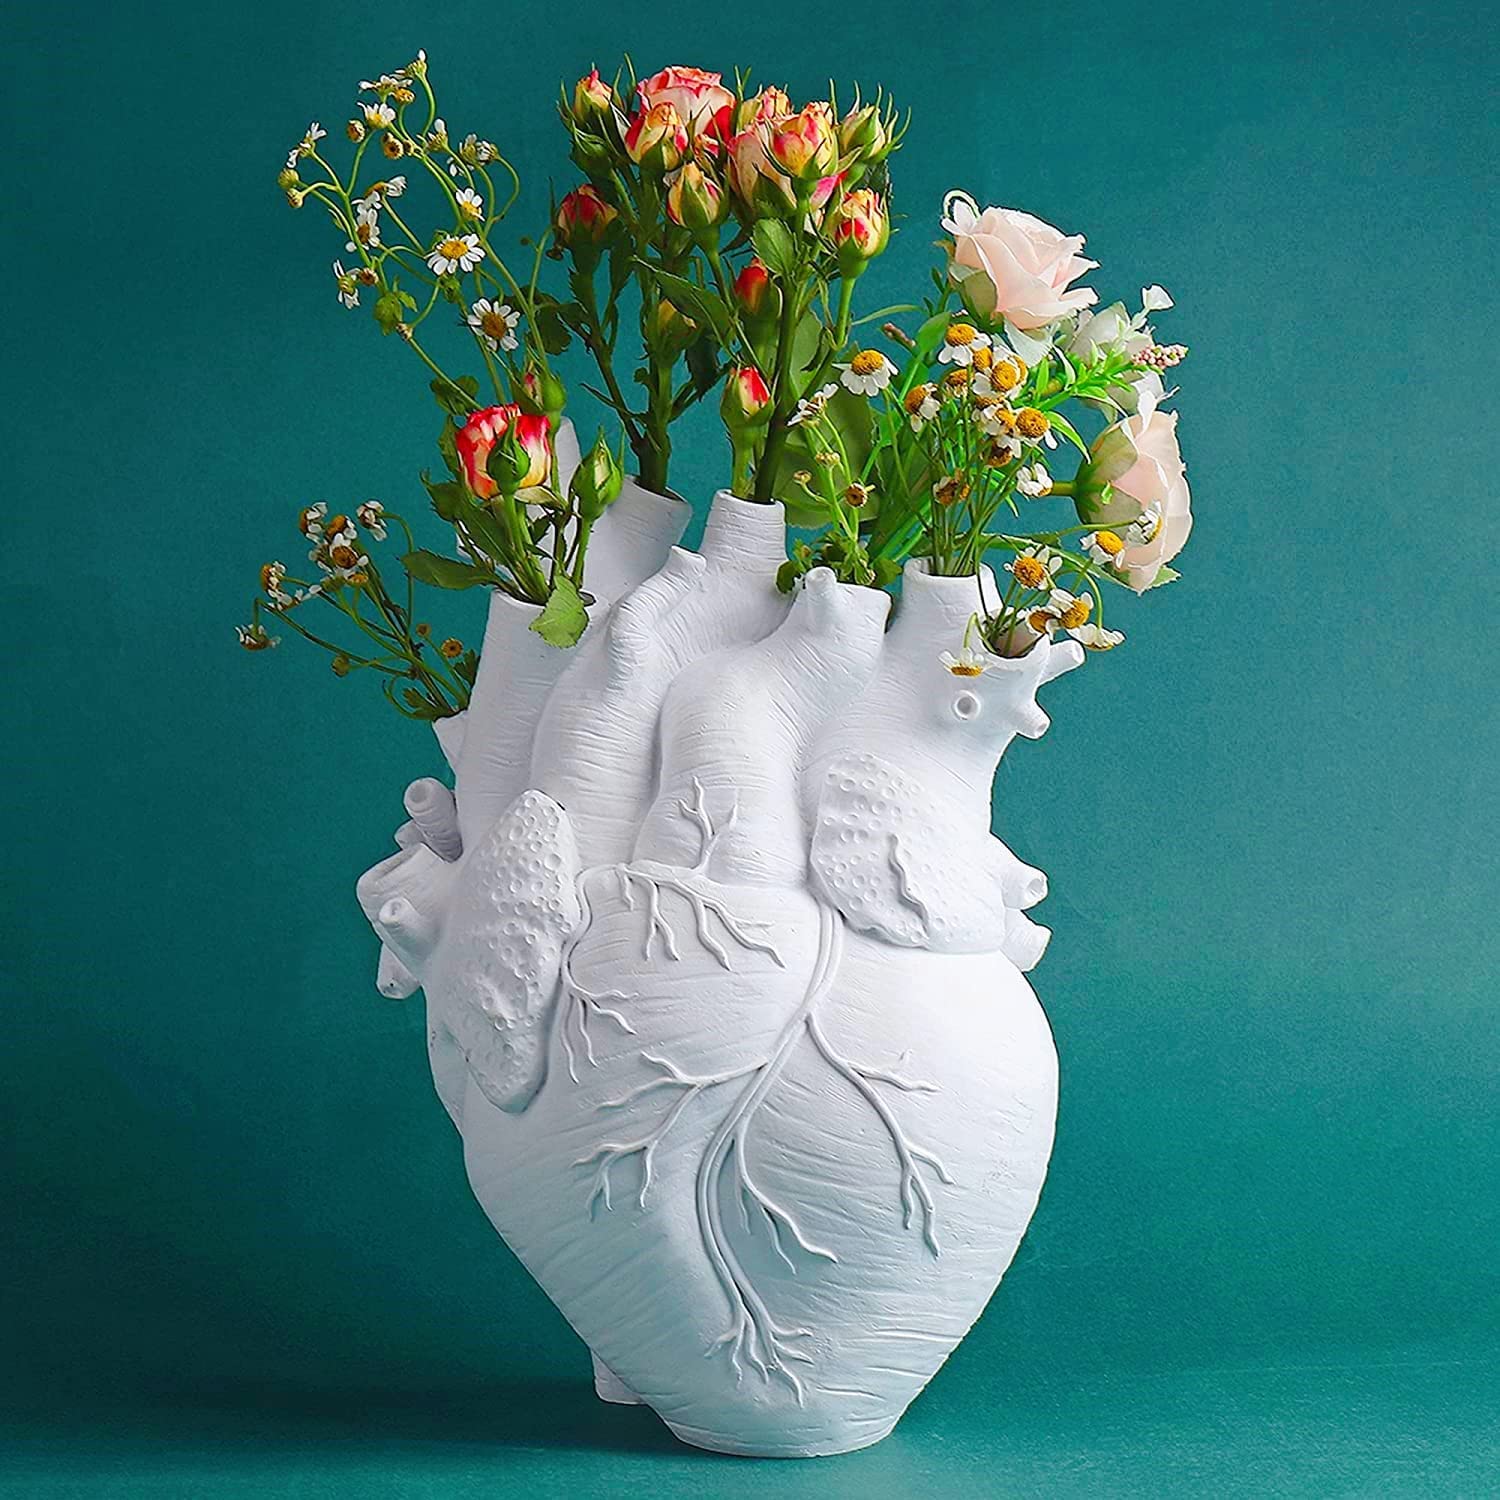 51 Decorative Vases To Beautify Home